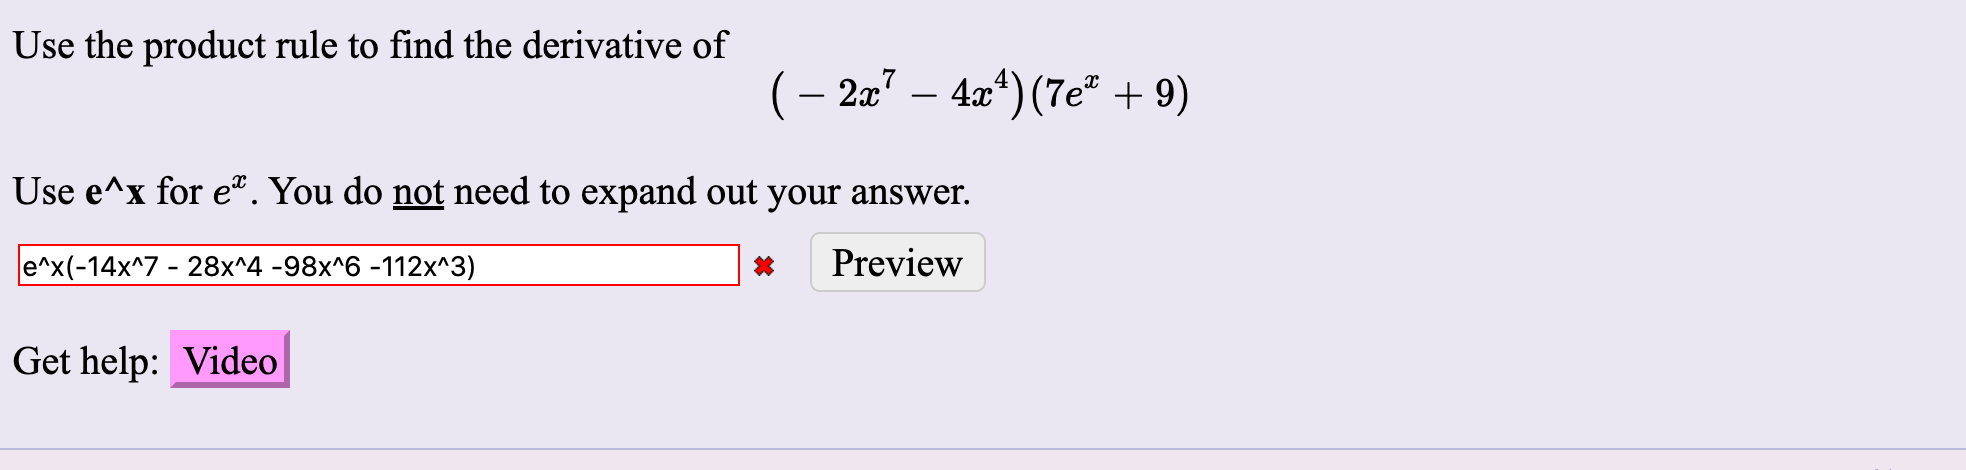 Use the product rule to find the derivative of
(– 2x" – 4x“) (7e" + 9)
Use e^x for e. You do not need to expand out your answer.
e^x(-14x^7 - 28x^4 -98x^6 -112x^3)
Preview
Get help: Video
